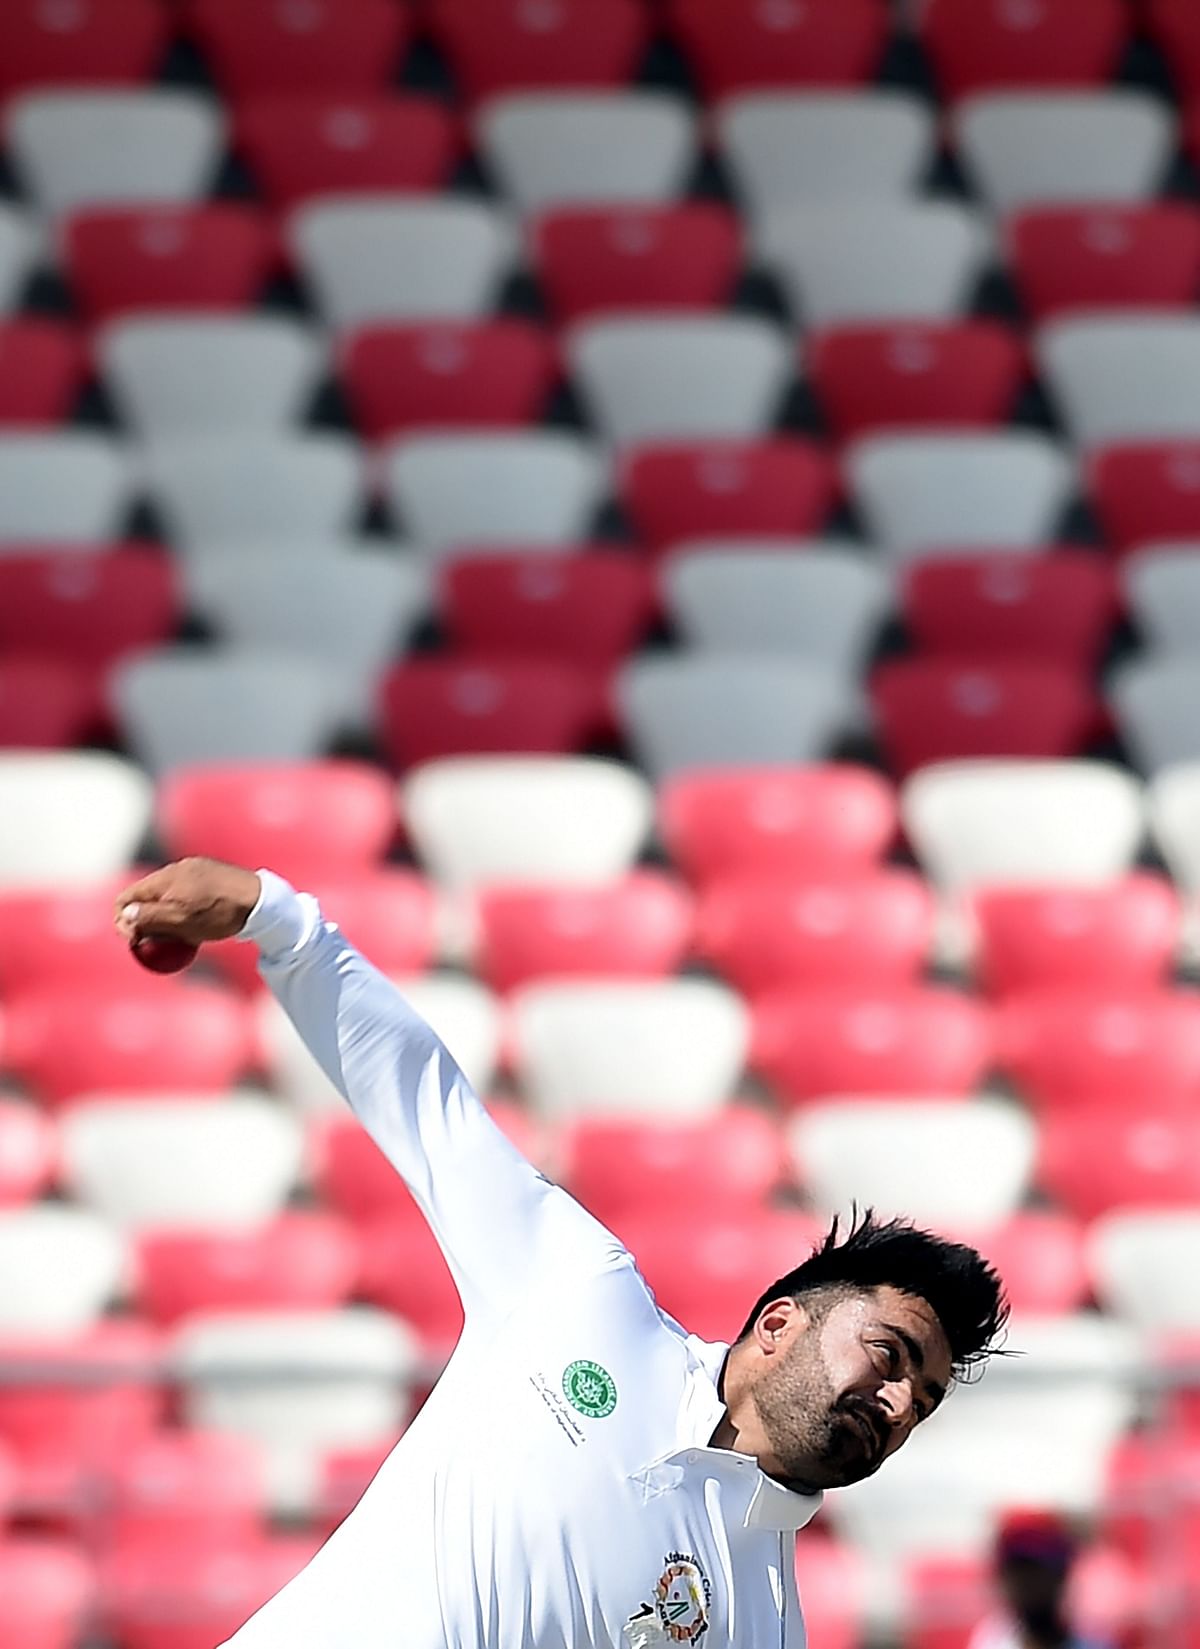 In this file photo taken on 17 March 2019, Afghanistan`s Rashid Khan bowls during the third day of the Test cricket match between Afghanistan and Ireland at the Rajiv Gandhi International Cricket Stadium in the northern Indian city of Dehradun. Photo: AFP